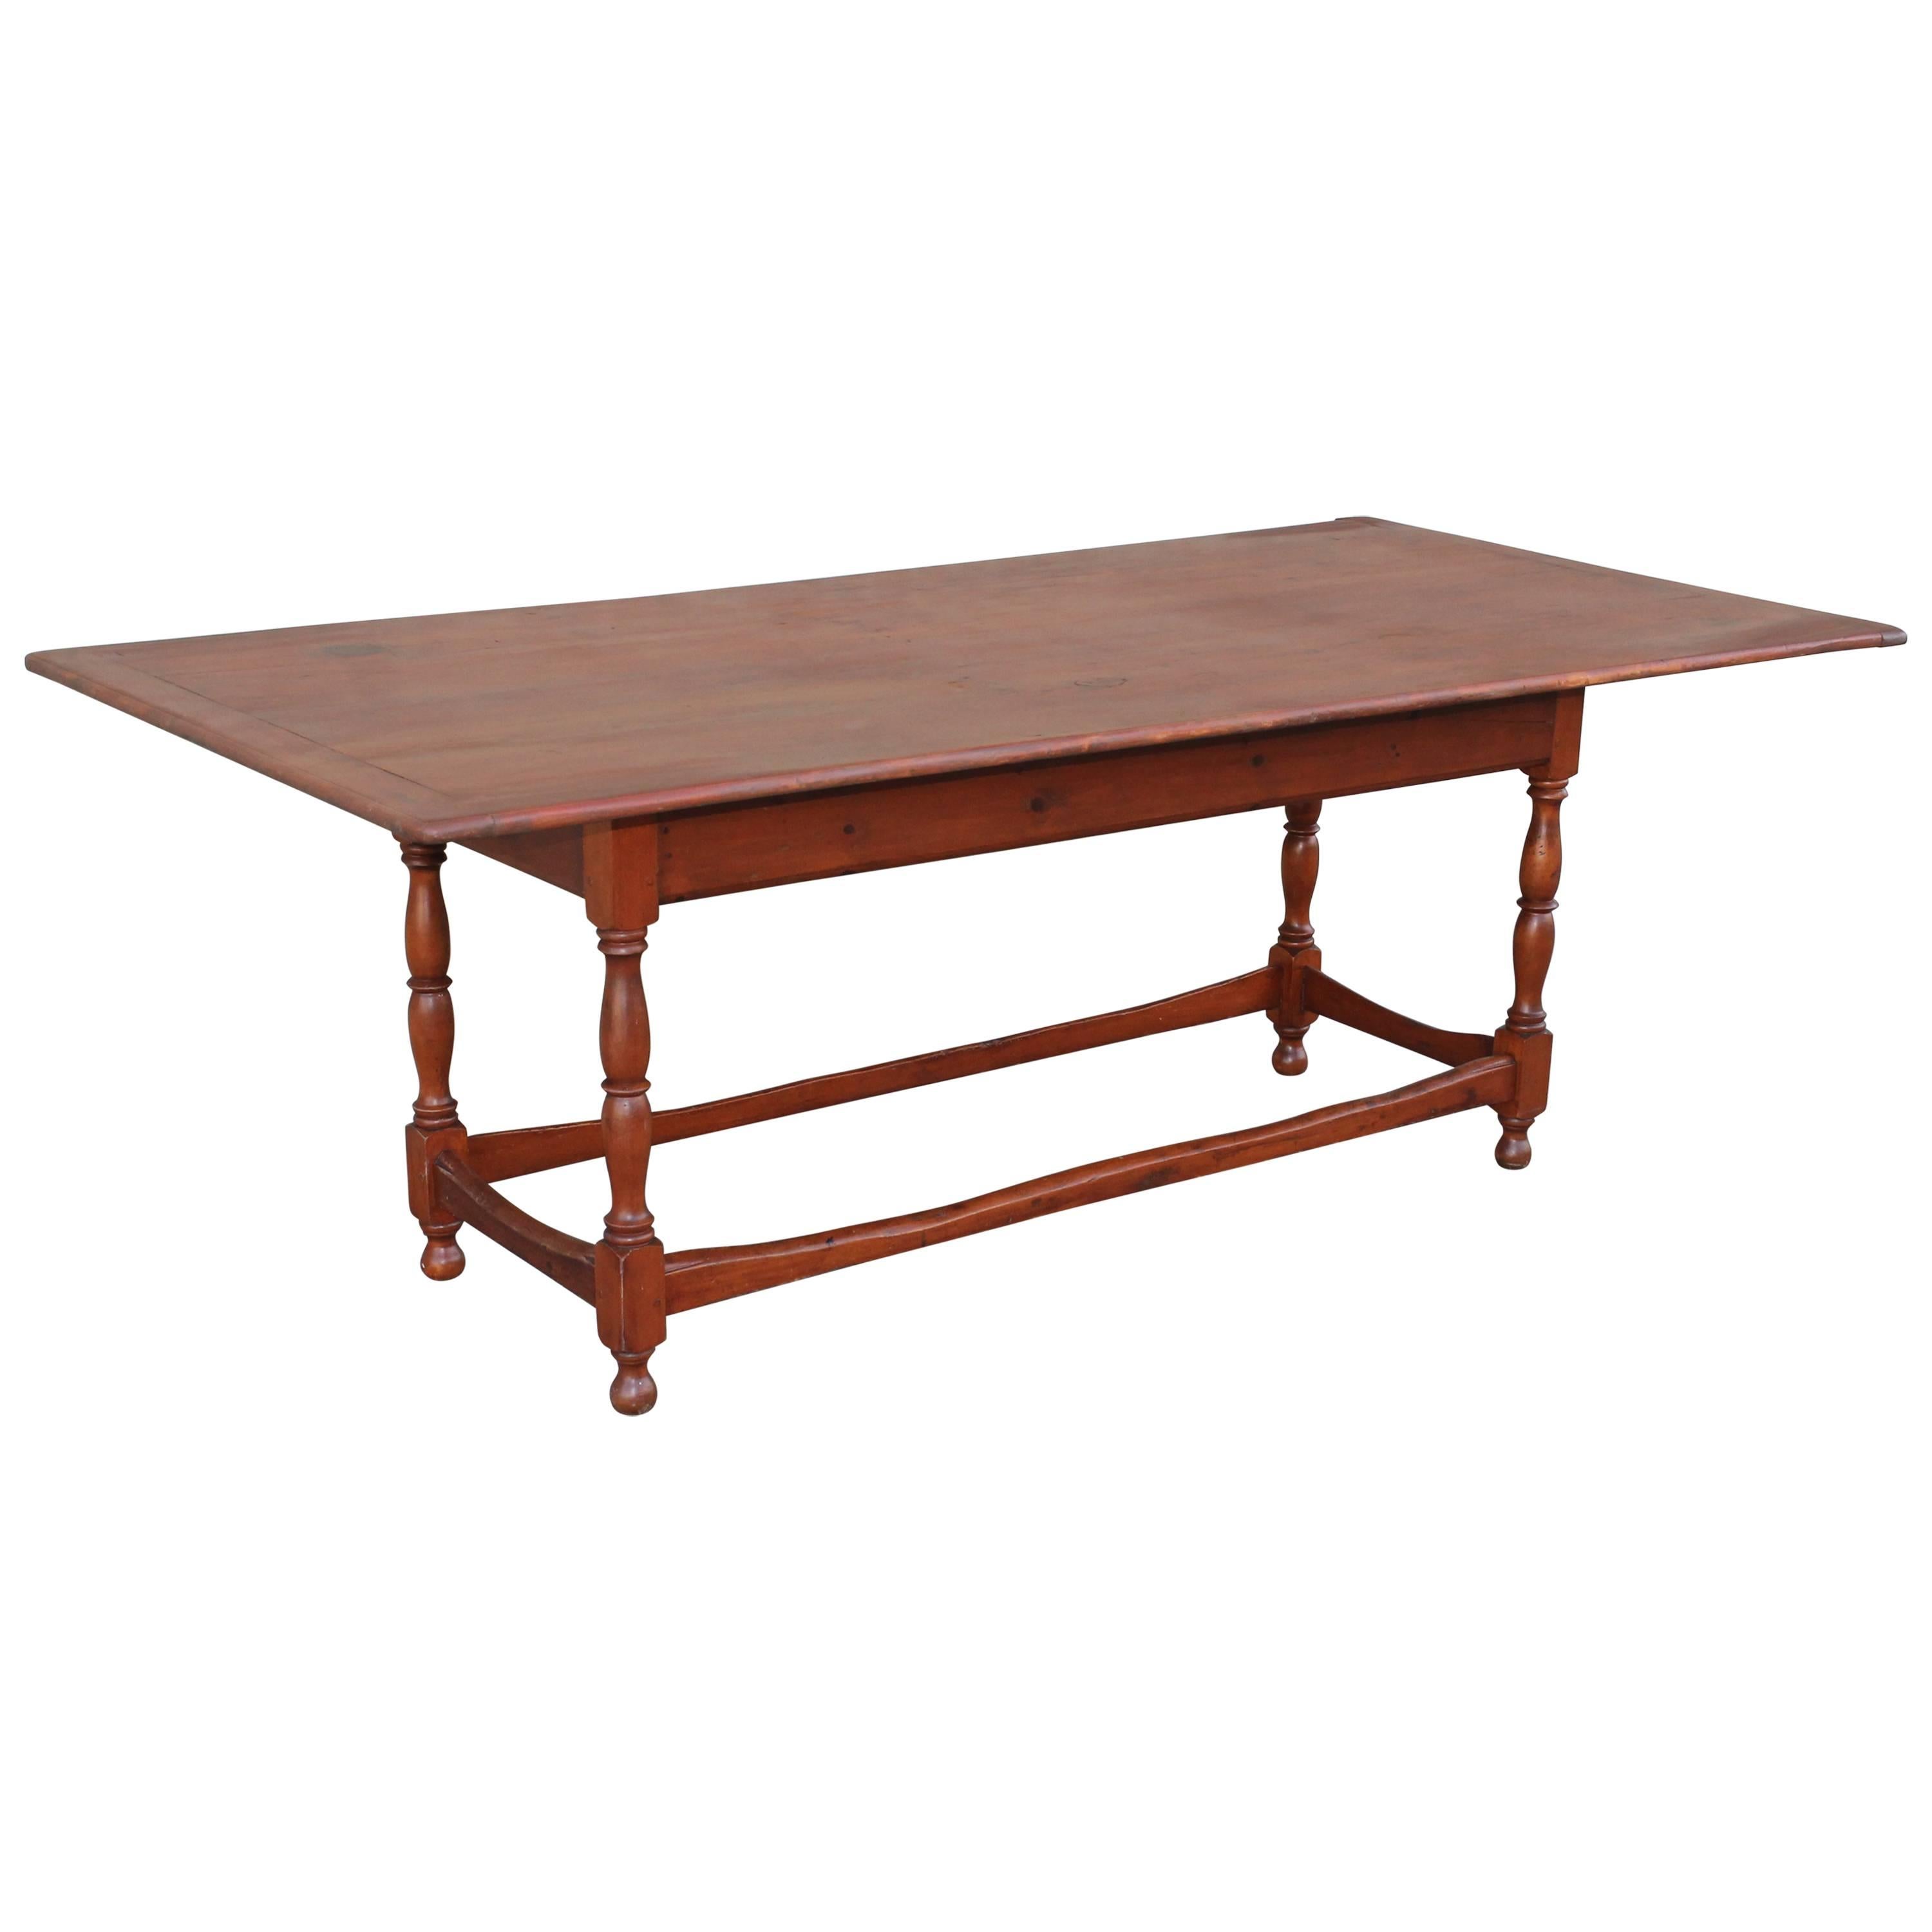 Monumental 19th Century Harvest Table from New England